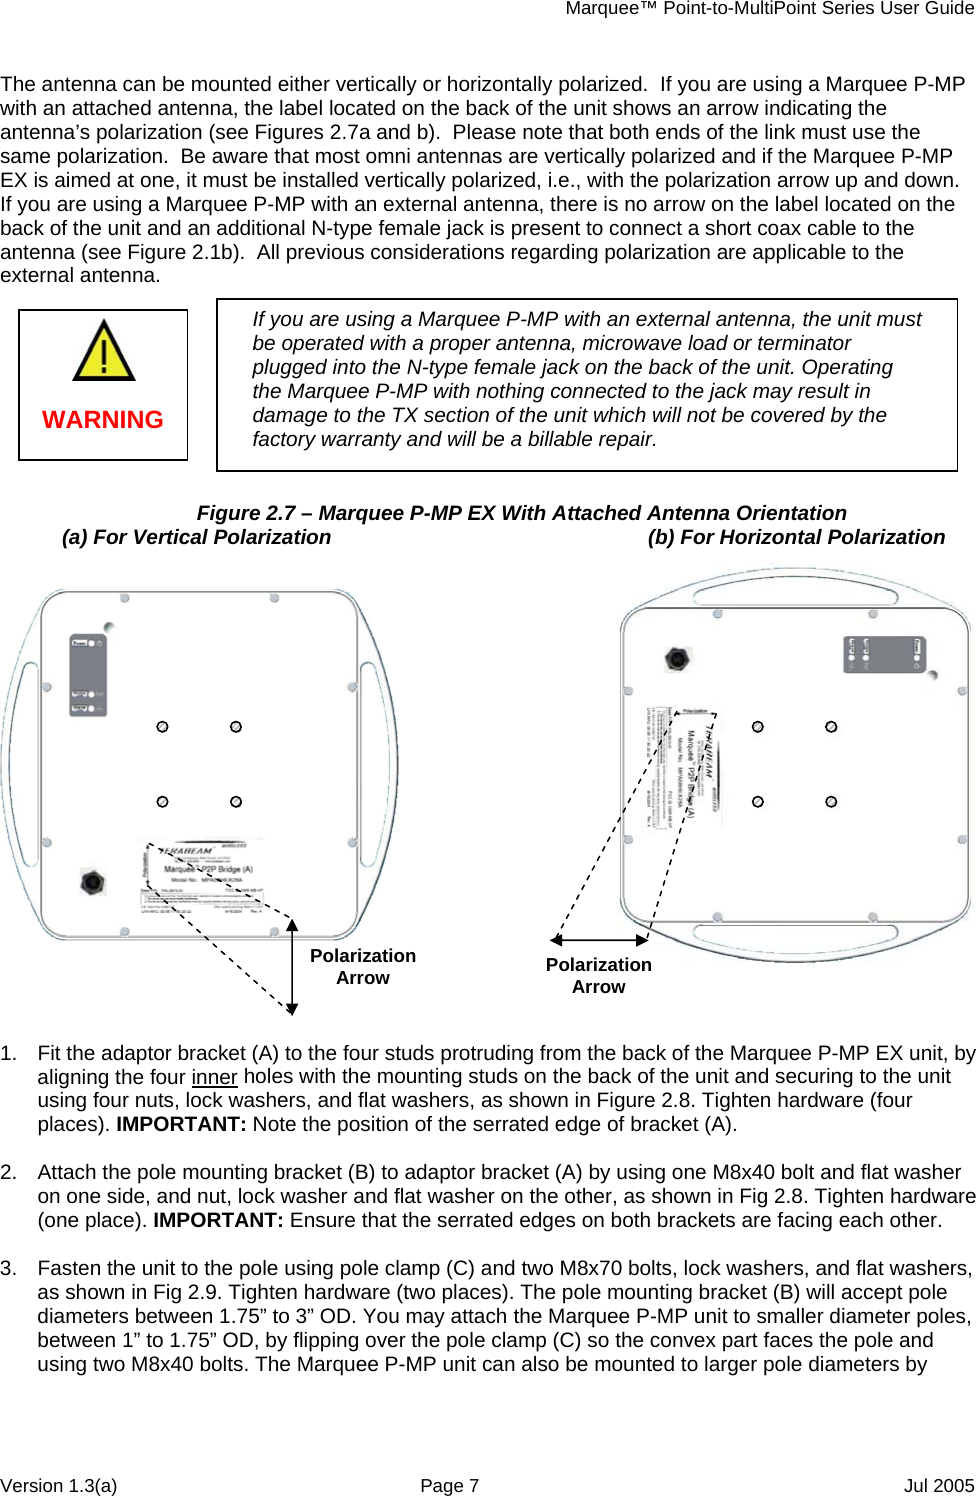     Marquee™ Point-to-MultiPoint Series User Guide The antenna can be mounted either vertically or horizontally polarized.  If you are using a Marquee P-MP with an attached antenna, the label located on the back of the unit shows an arrow indicating the antenna’s polarization (see Figures 2.7a and b).  Please note that both ends of the link must use the same polarization.  Be aware that most omni antennas are vertically polarized and if the Marquee P-MP EX is aimed at one, it must be installed vertically polarized, i.e., with the polarization arrow up and down. If you are using a Marquee P-MP with an external antenna, there is no arrow on the label located on the back of the unit and an additional N-type female jack is present to connect a short coax cable to the antenna (see Figure 2.1b).  All previous considerations regarding polarization are applicable to the external antenna.   Figure 2.7 – Marquee P-MP EX With Attached Antenna Orientation    (a) For Vertical Polarization    (b) For Horizontal Polarization Polarization Arrow  Polarization Arrow   WARNING If you are using a Marquee P-MP with an external antenna, the unit must be operated with a proper antenna, microwave load or terminator plugged into the N-type female jack on the back of the unit. Operating the Marquee P-MP with nothing connected to the jack may result in damage to the TX section of the unit which will not be covered by the factory warranty and will be a billable repair. 1.  Fit the adaptor bracket (A) to the four studs protruding from the back of the Marquee P-MP EX unit, by aligning the four inner holes with the mounting studs on the back of the unit and securing to the unit using four nuts, lock washers, and flat washers, as shown in Figure 2.8. Tighten hardware (four places). IMPORTANT: Note the position of the serrated edge of bracket (A). Attach the pole mounting bracket (B) to adaptor bracket (A) by using one M8x .  40 bolt and flat washer    .  s, 2on one side, and nut, lock washer and flat washer on the other, as shown in Fig 2.8. Tighten hardware(one place). IMPORTANT: Ensure that the serrated edges on both brackets are facing each other. Fasten the unit to the pole using pole clamp (C) and two M8x70 bolts, lock washers, and flat washer3as shown in Fig 2.9. Tighten hardware (two places). The pole mounting bracket (B) will accept pole diameters between 1.75” to 3” OD. You may attach the Marquee P-MP unit to smaller diameter poles, between 1” to 1.75” OD, by flipping over the pole clamp (C) so the convex part faces the pole and using two M8x40 bolts. The Marquee P-MP unit can also be mounted to larger pole diameters by Version 1.3(a)  Page 7  Jul 2005 